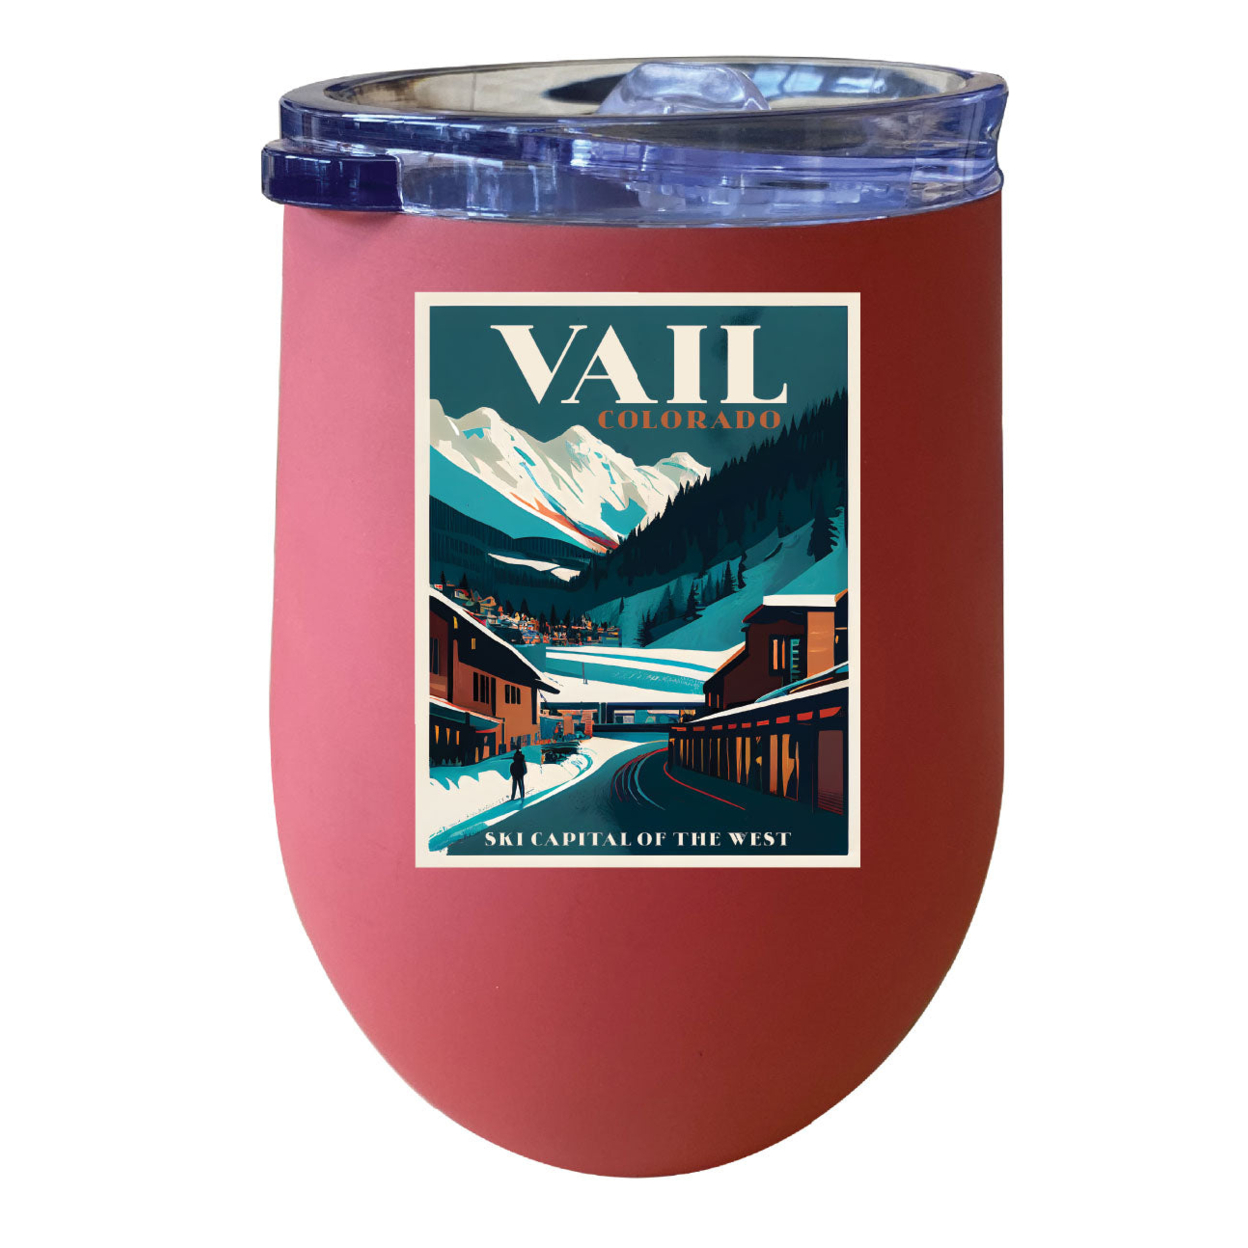 Vail Colorado Souvenir 12 Oz Insulated Wine Stainless Steel Tumbler - Navy